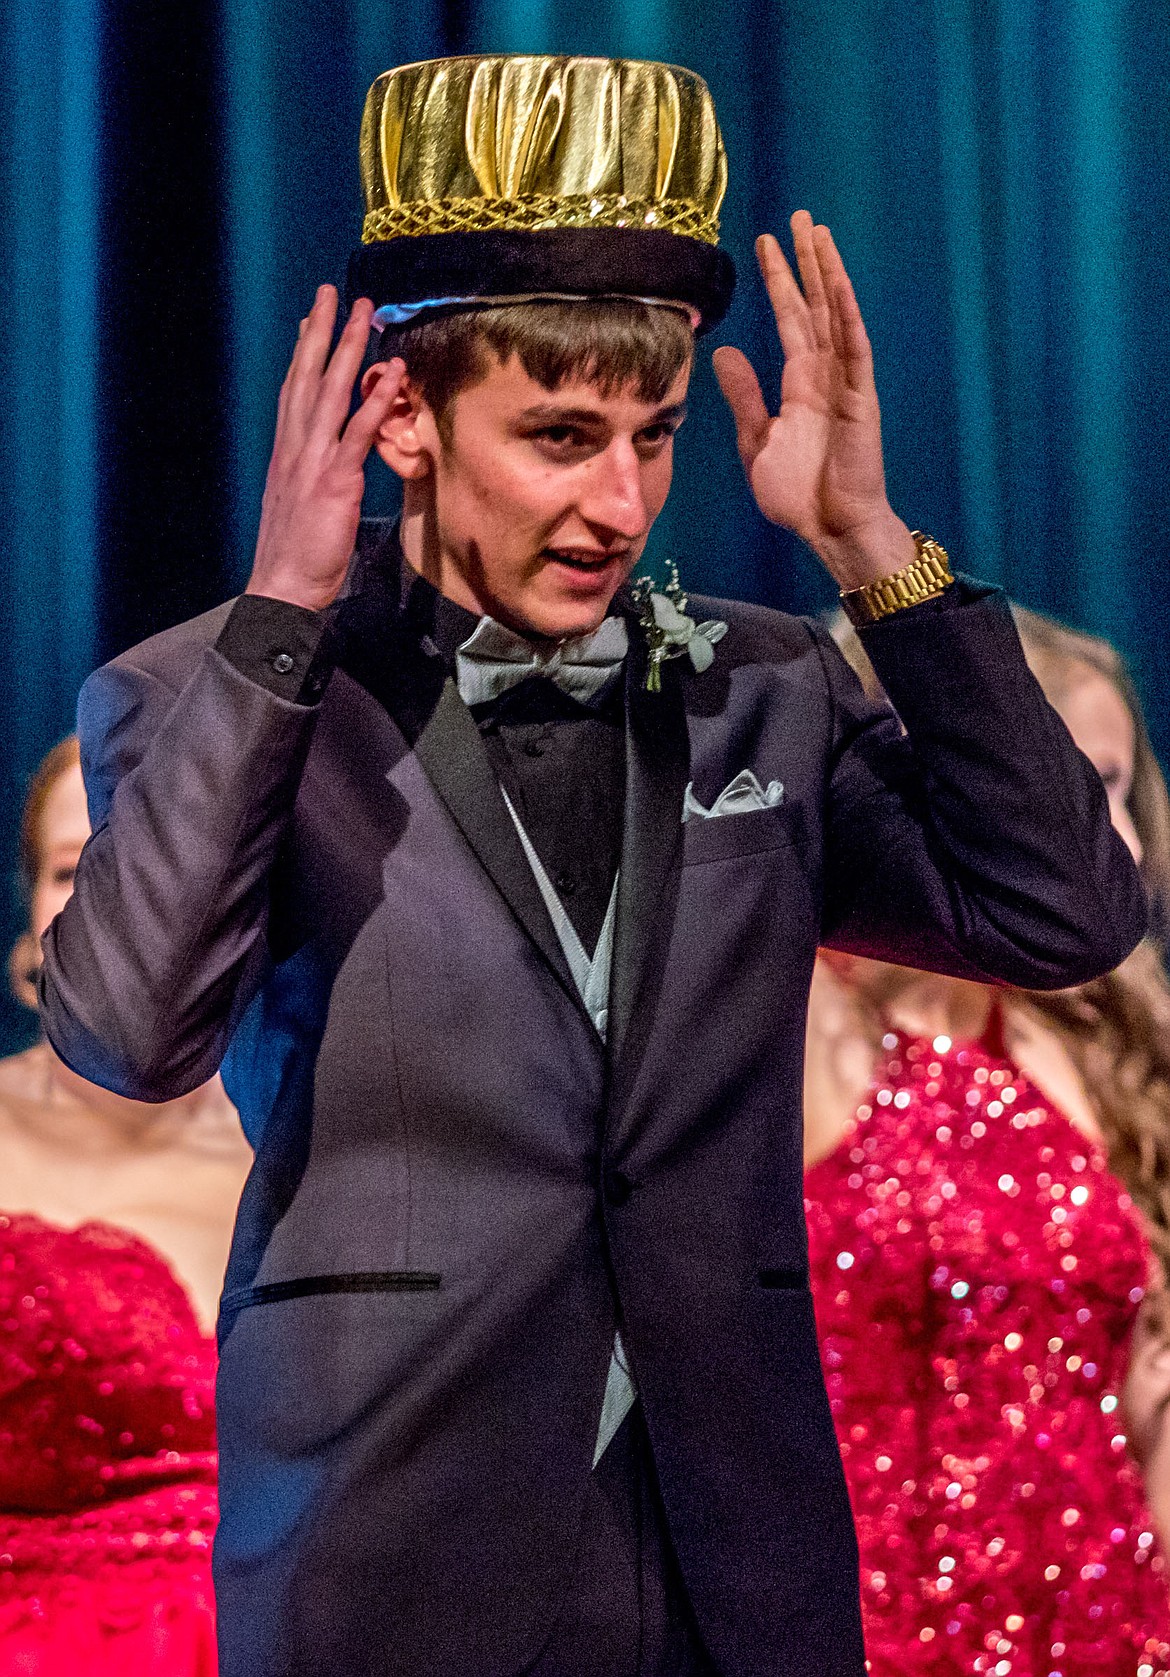 Libby senior Brian Peck puts on the king&#146;s crown at Libby Prom on Saturday, March 17, 2018. (John Blodgett/The Western News)